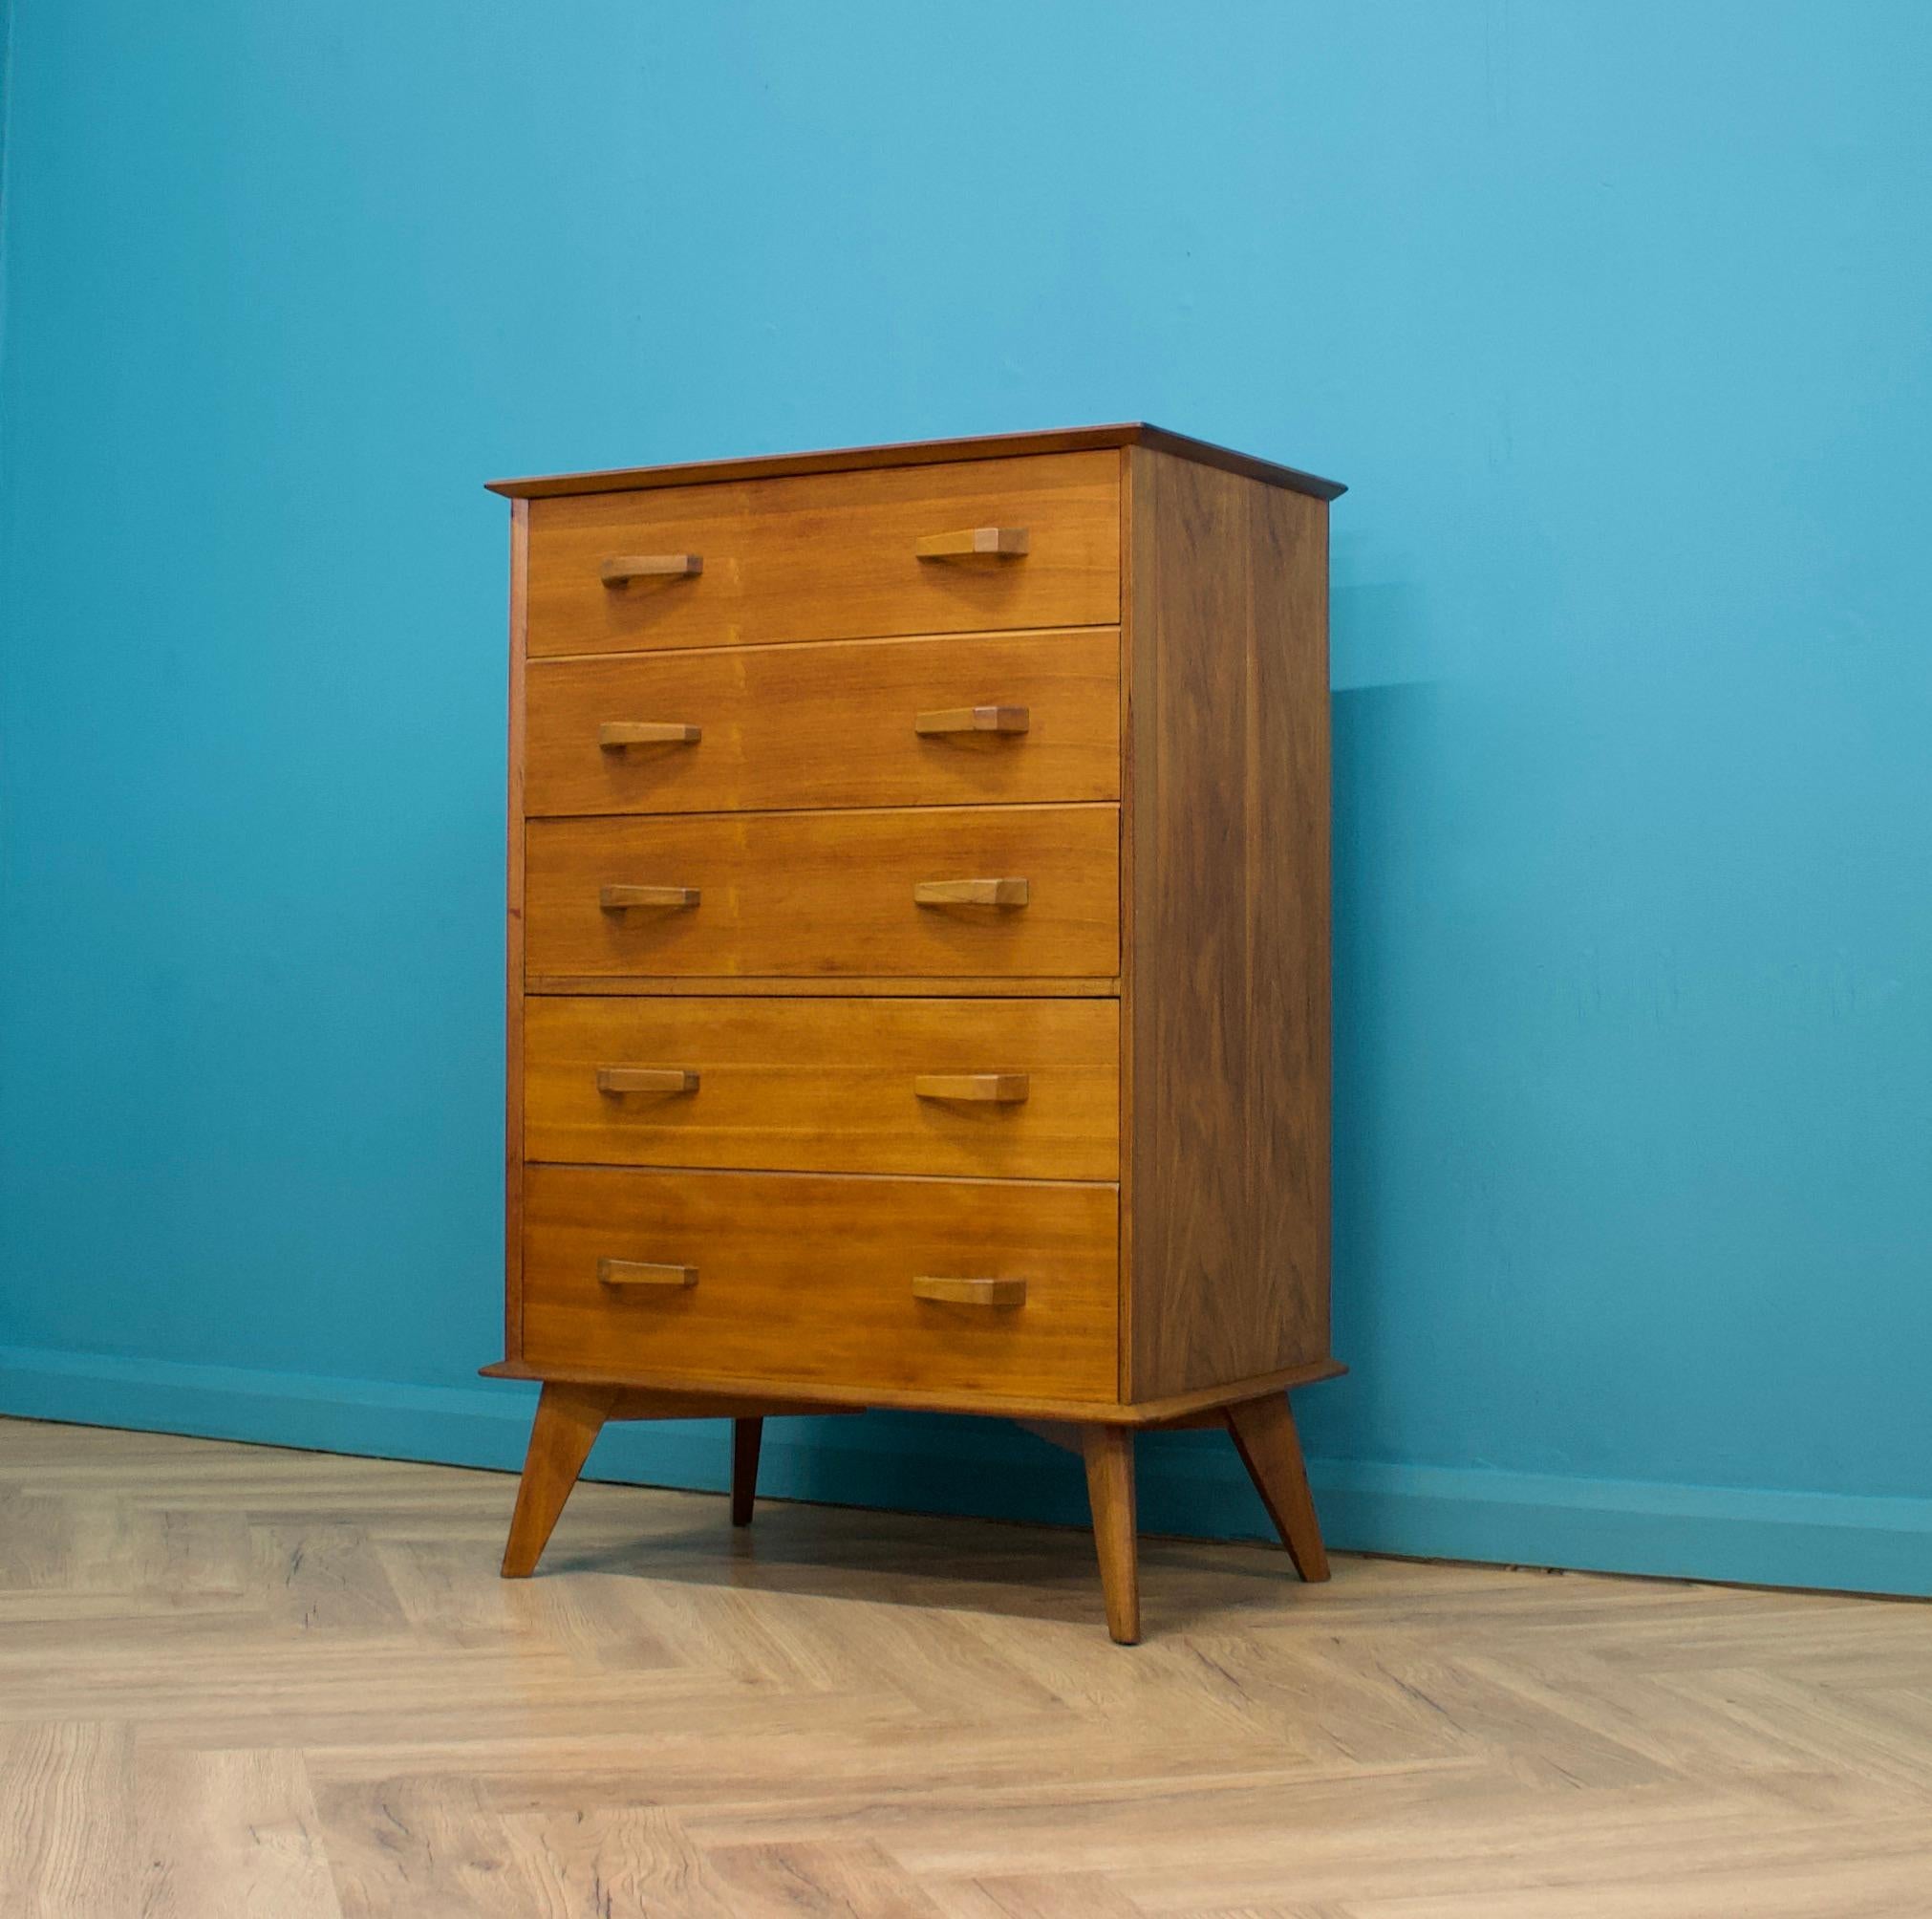 Mid-Century Modern Mid-Century Chest of Drawers in Walnut & Teak from AY Crown Furniture, 1960s For Sale